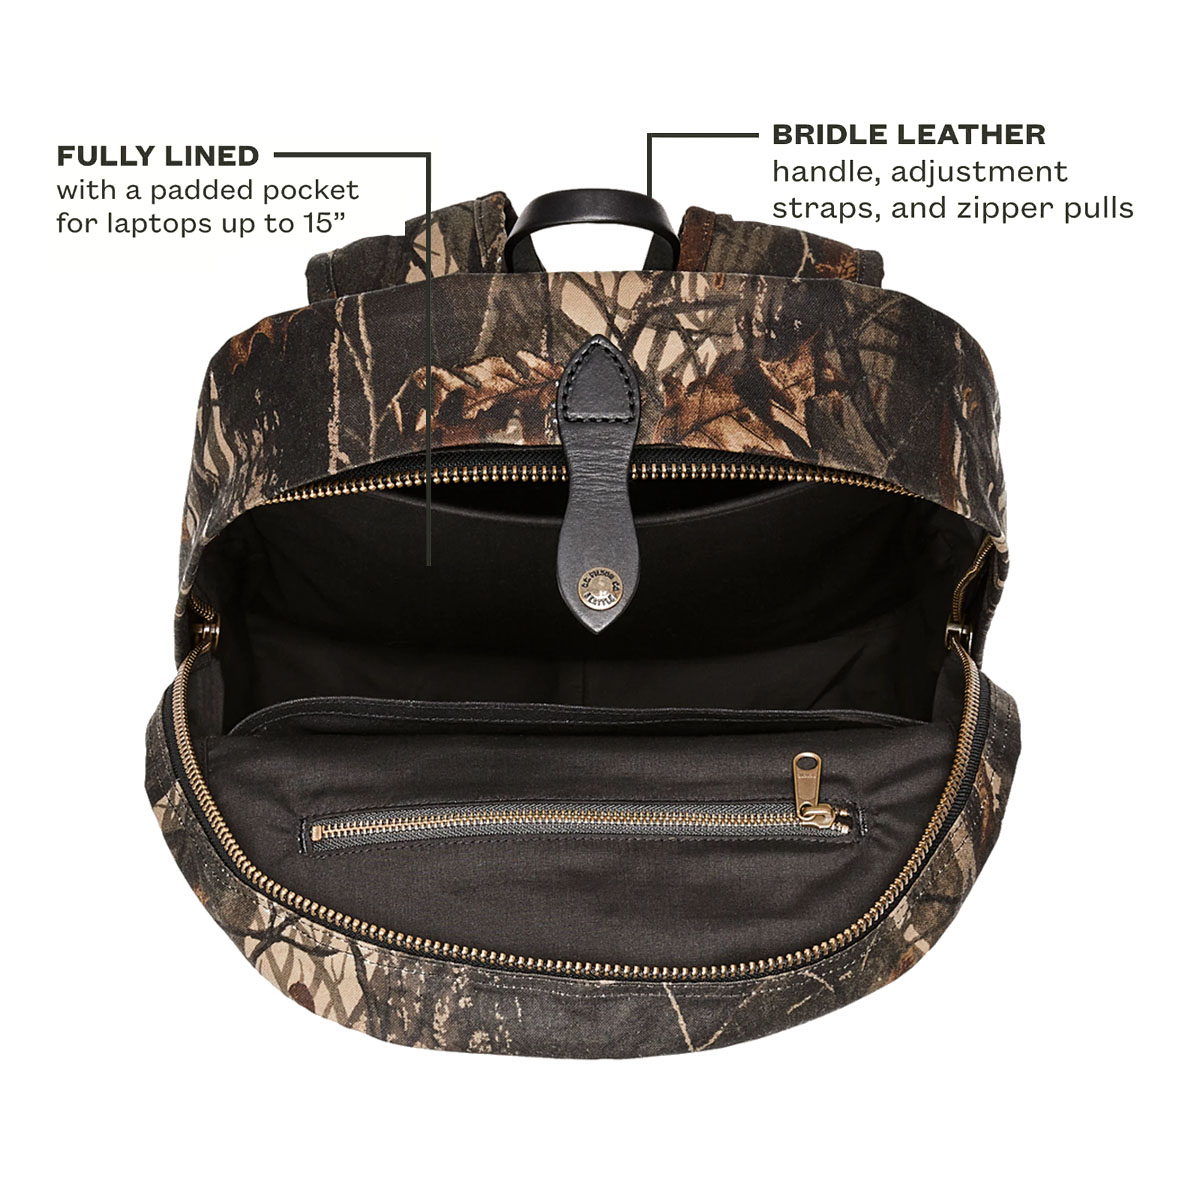 Filson Journeyman Backpack Realtree Hardwoods Camo, fully lined with a protected compartment for your laptop